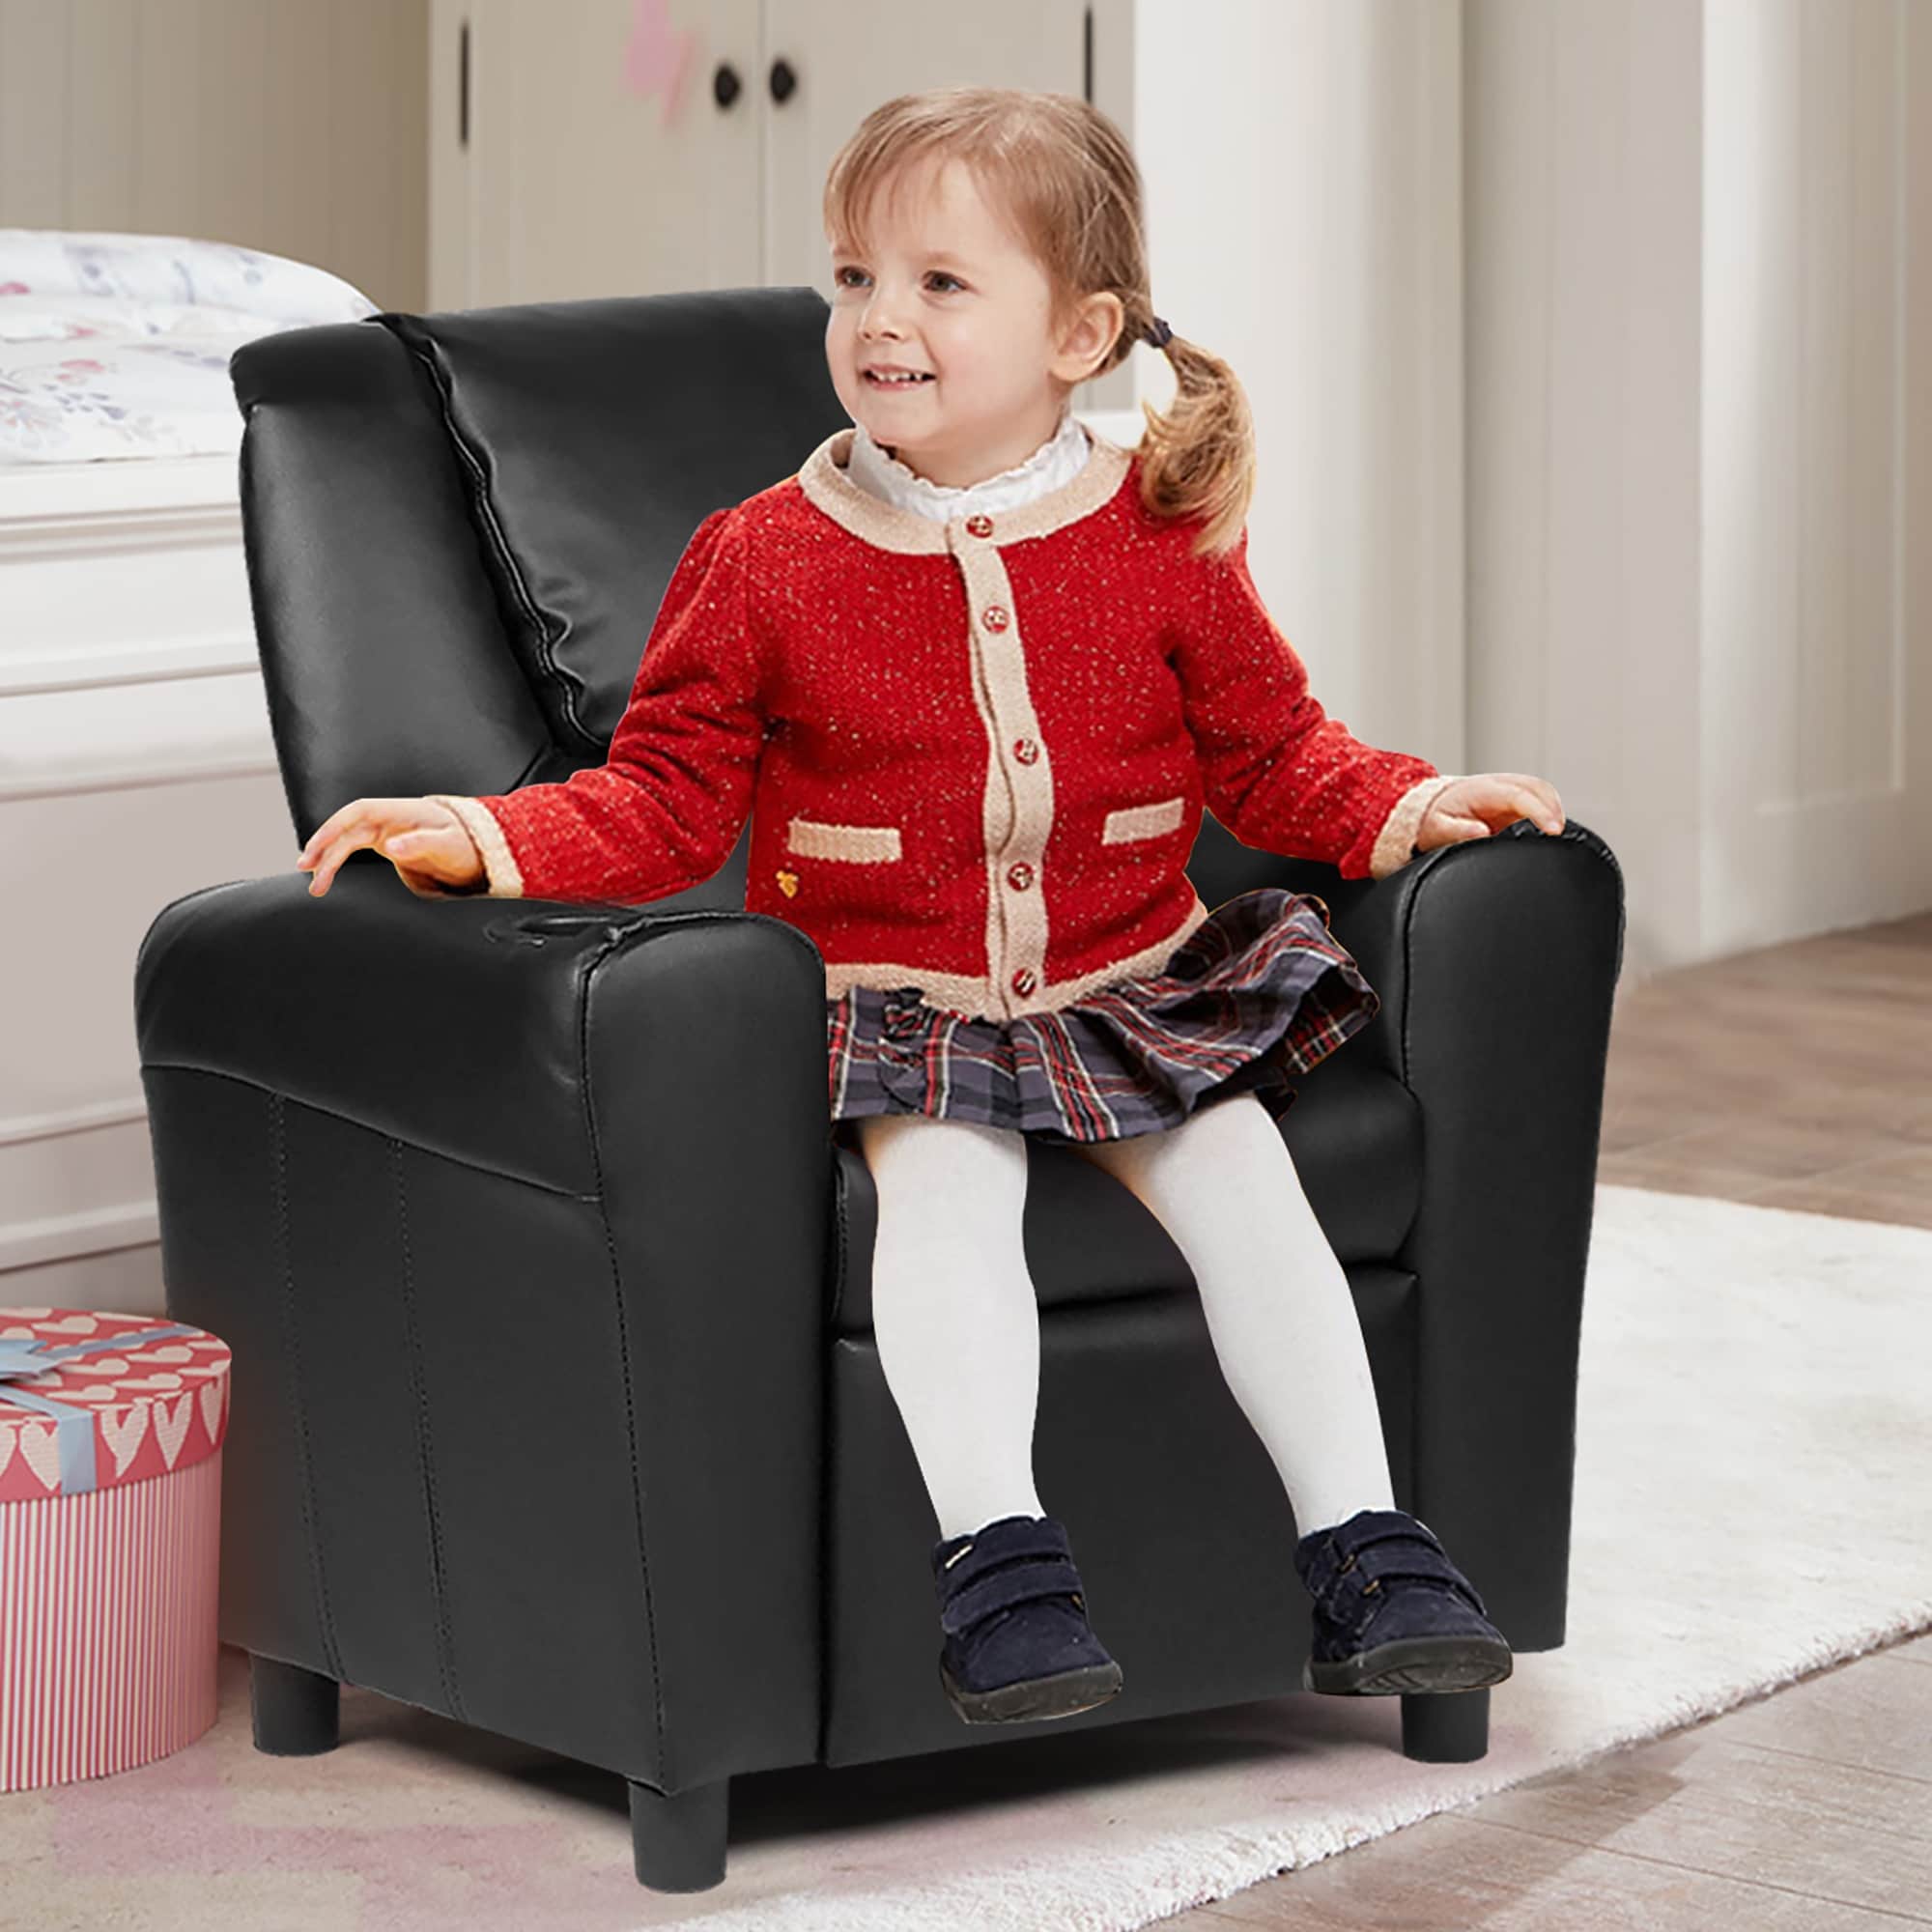 Kids Recliner Armchair Children's Furniture Sofa Seat Couch Chair w/Cup Holder 